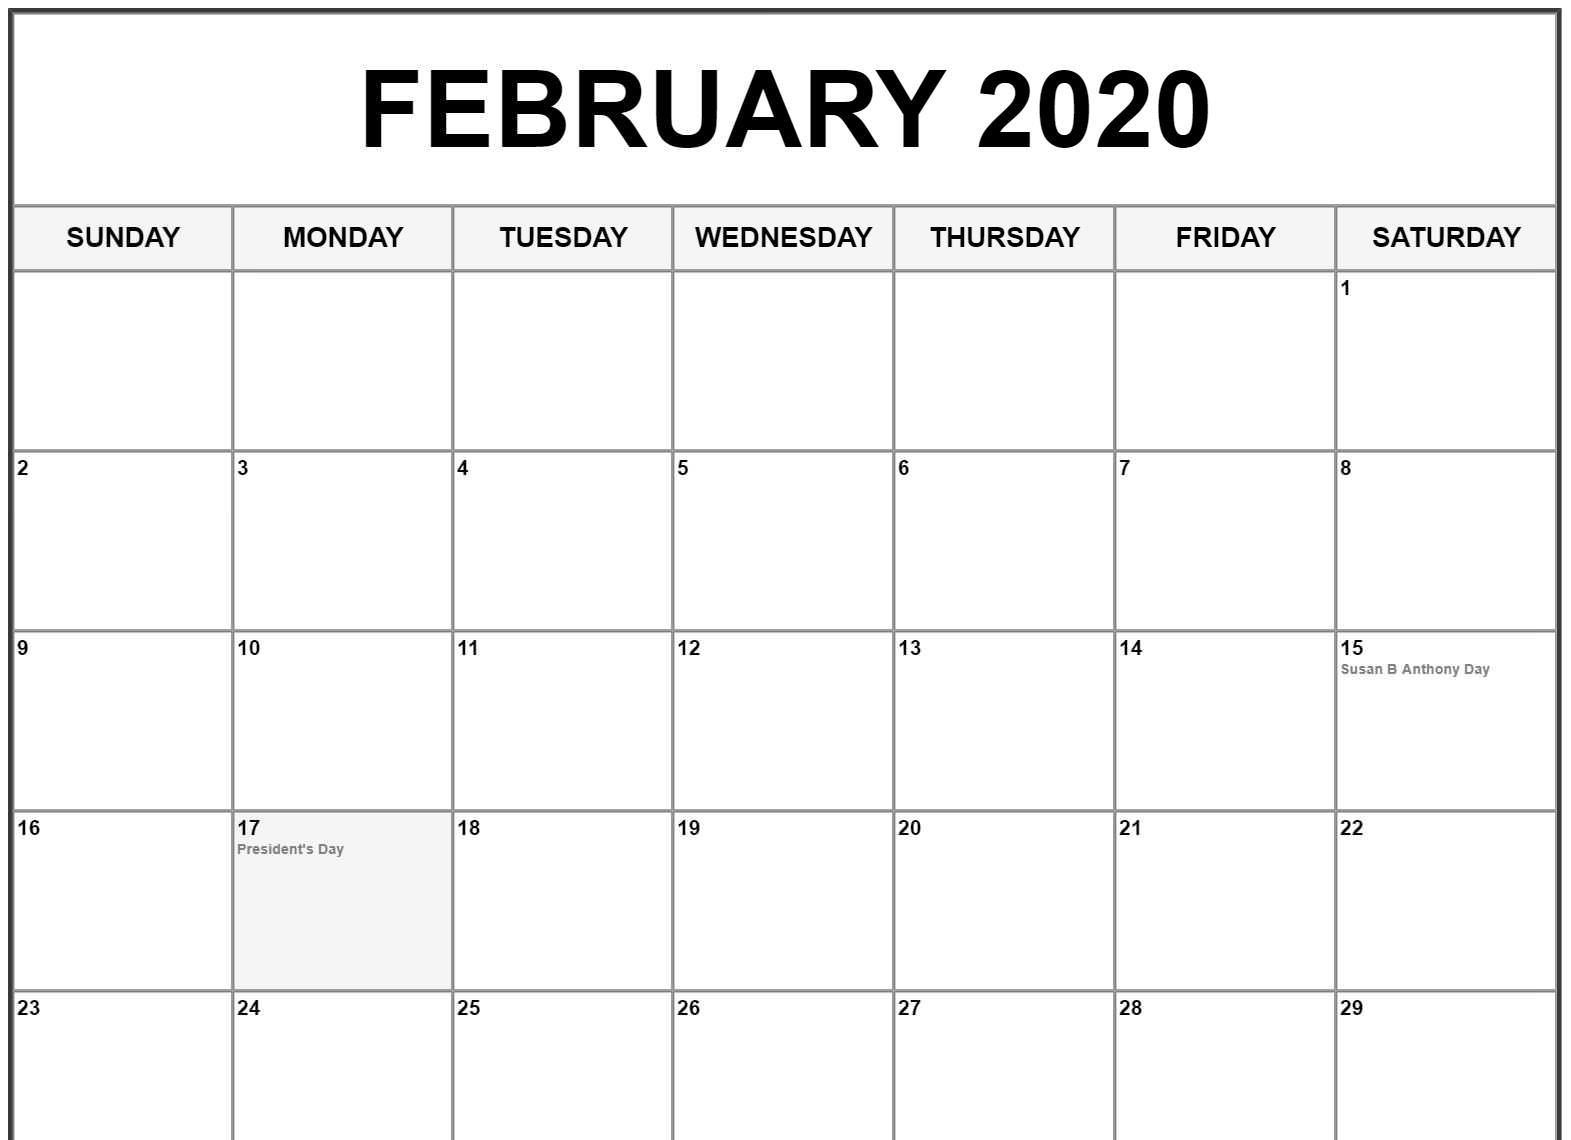 February 2020 Calendar Us Holidays With Images